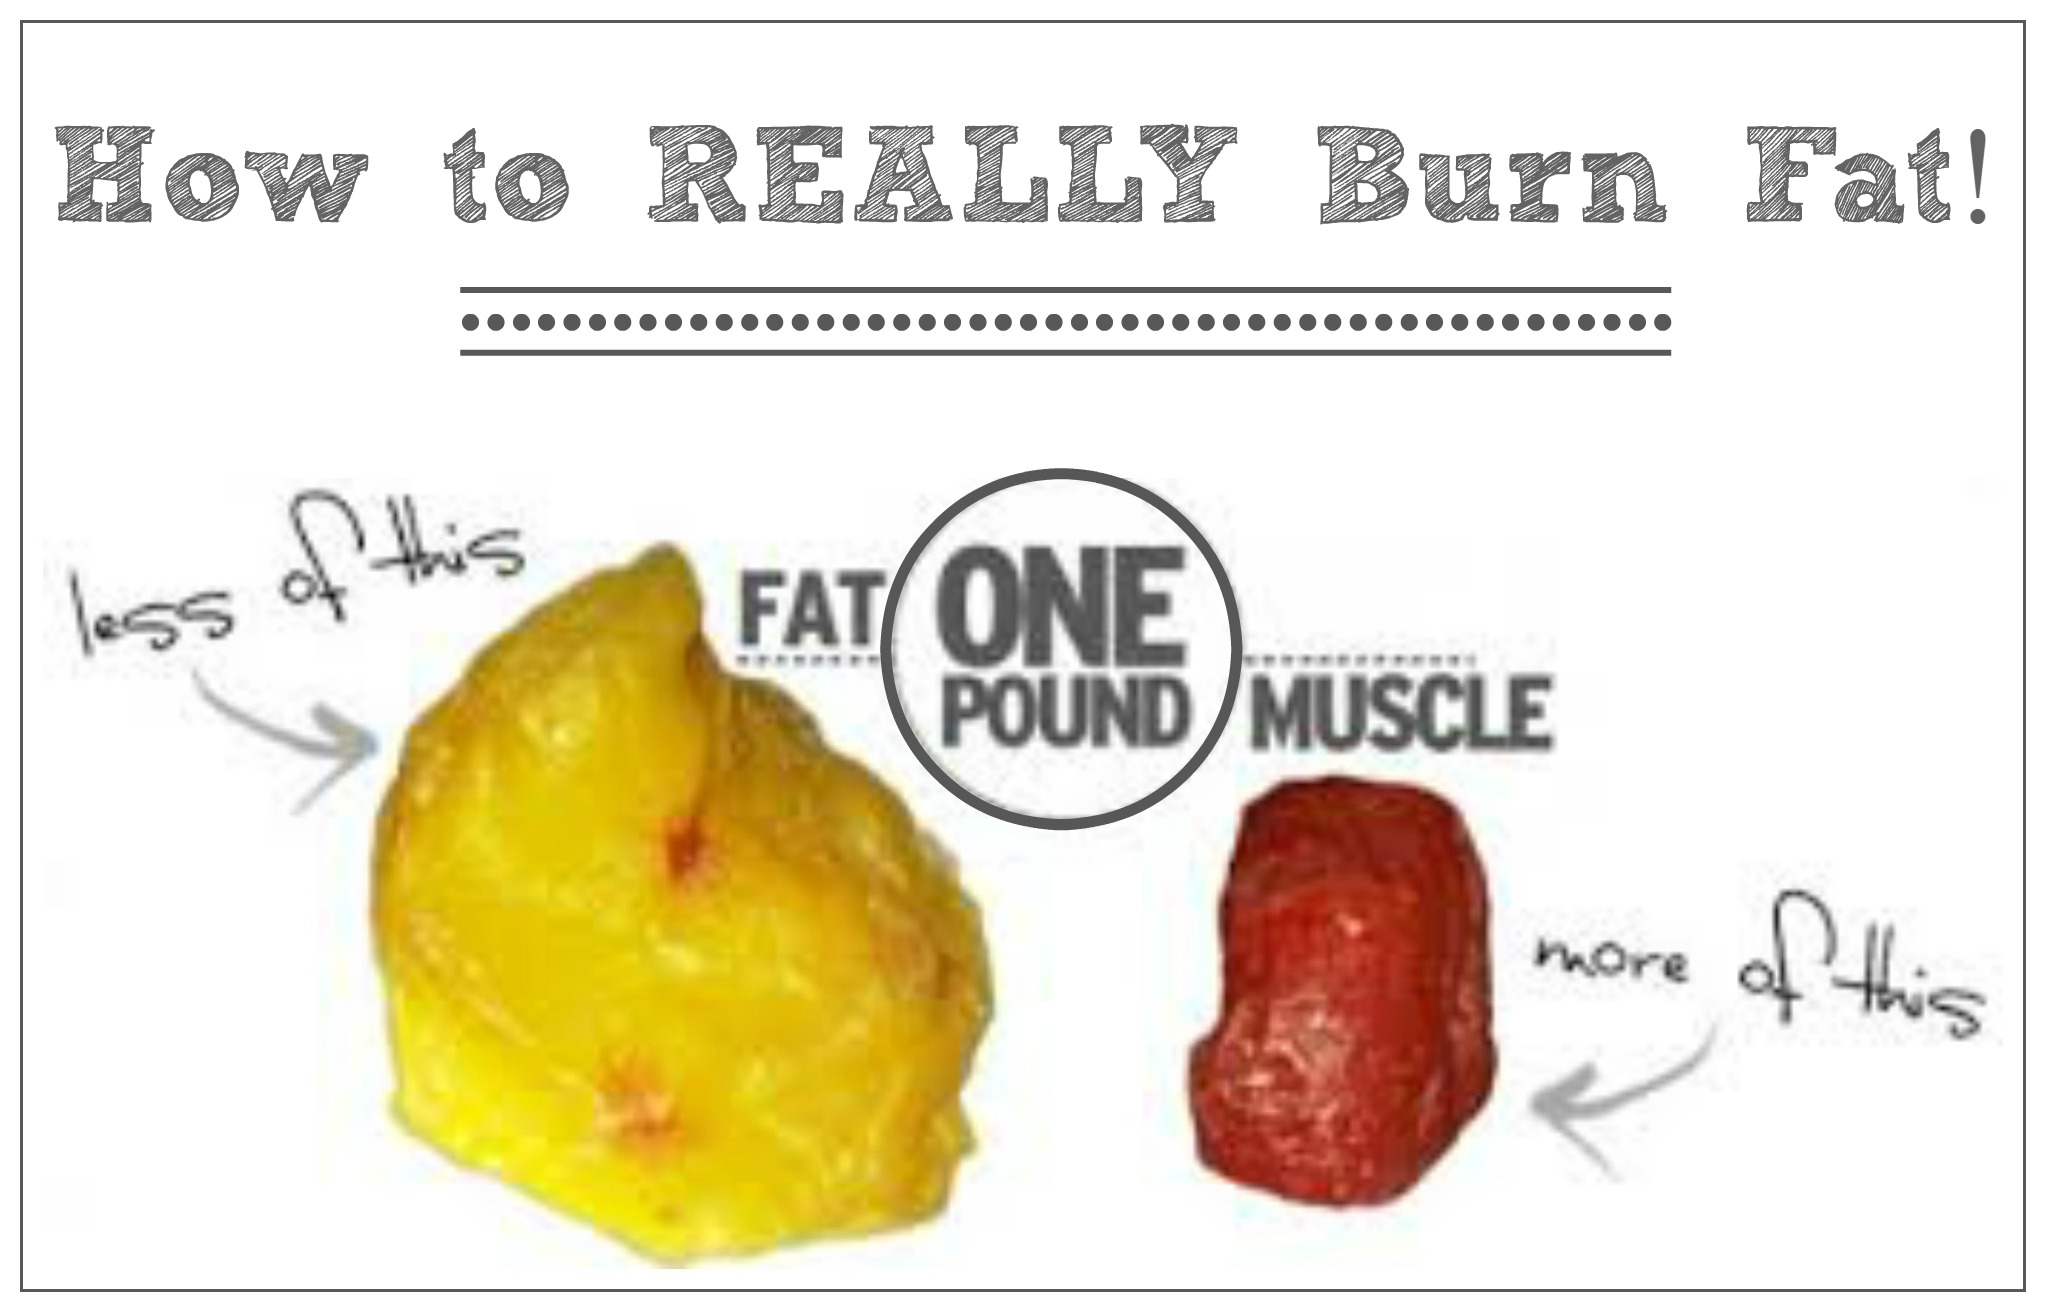 fat v muscle2